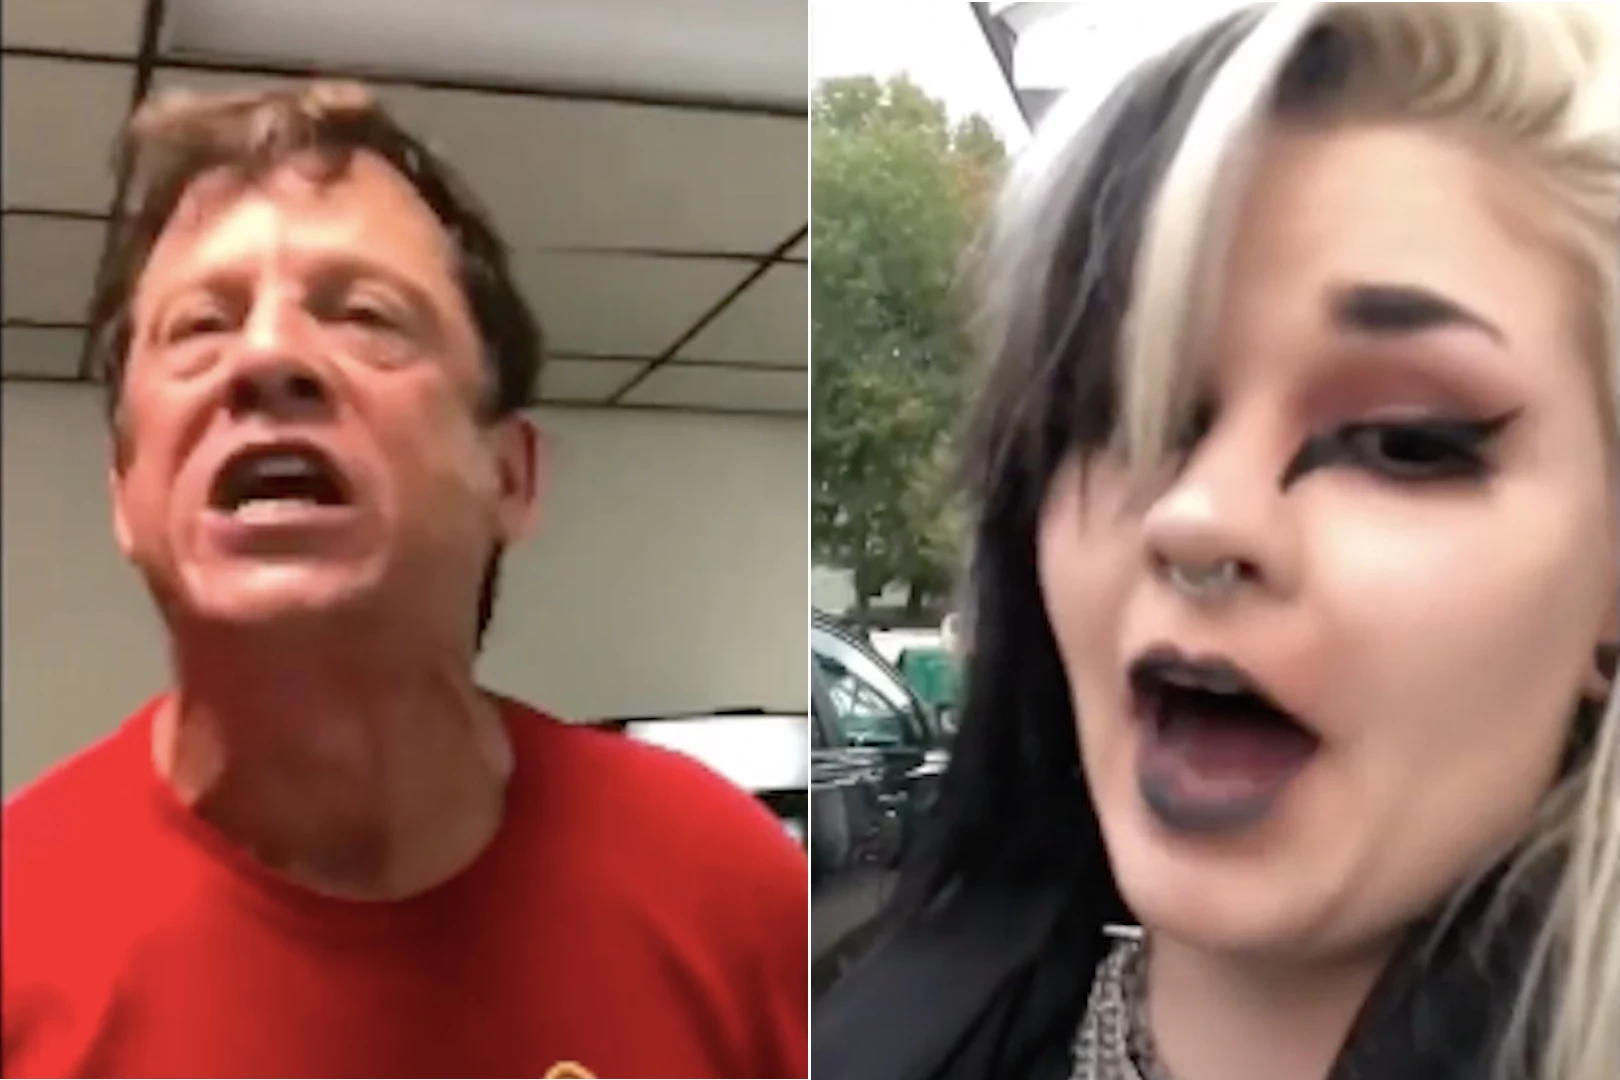 Christian Restaurant Owner Goes Absolutely Psycho on Goth Girl picture